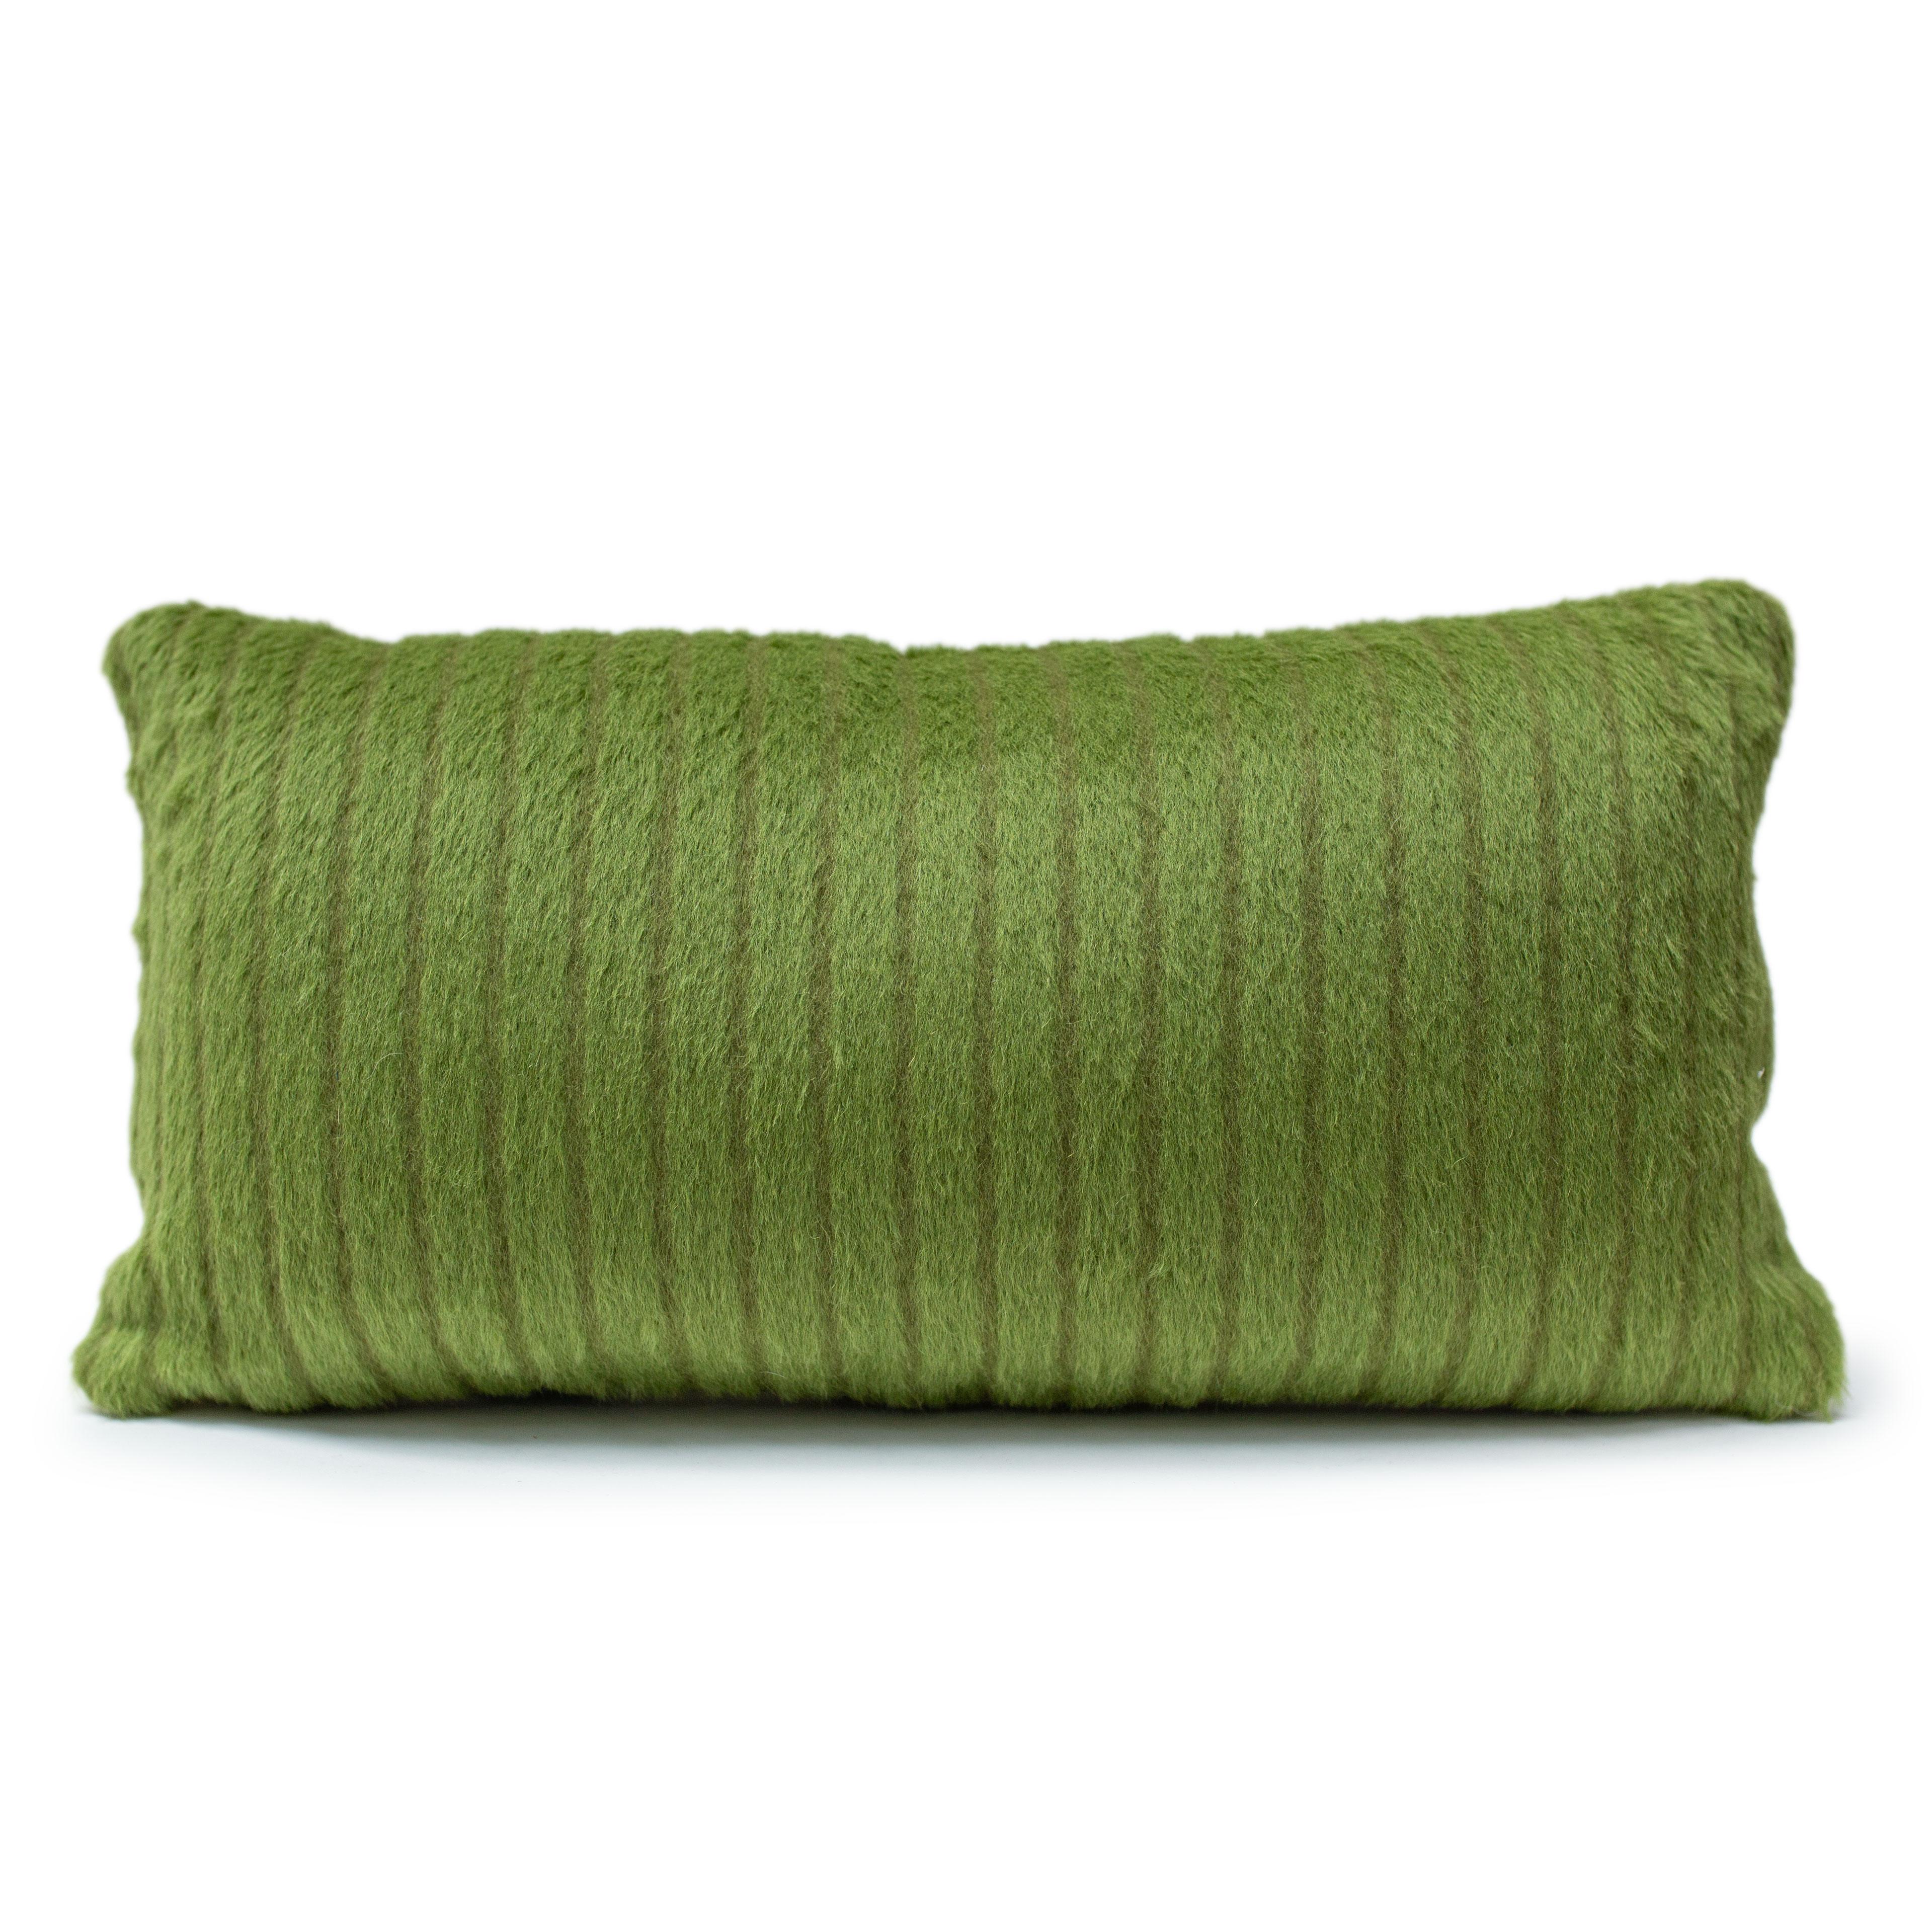 Pillow front in hand-painted, botanical plant-dyed felted wool fabric by JG SWITZER, backed with Sandra Jordan Prima Alpaca in Solid Lime. 

Please note: Lime pillow backing will be SOLID as seen on the body pillow, not striped. Feel free to reach